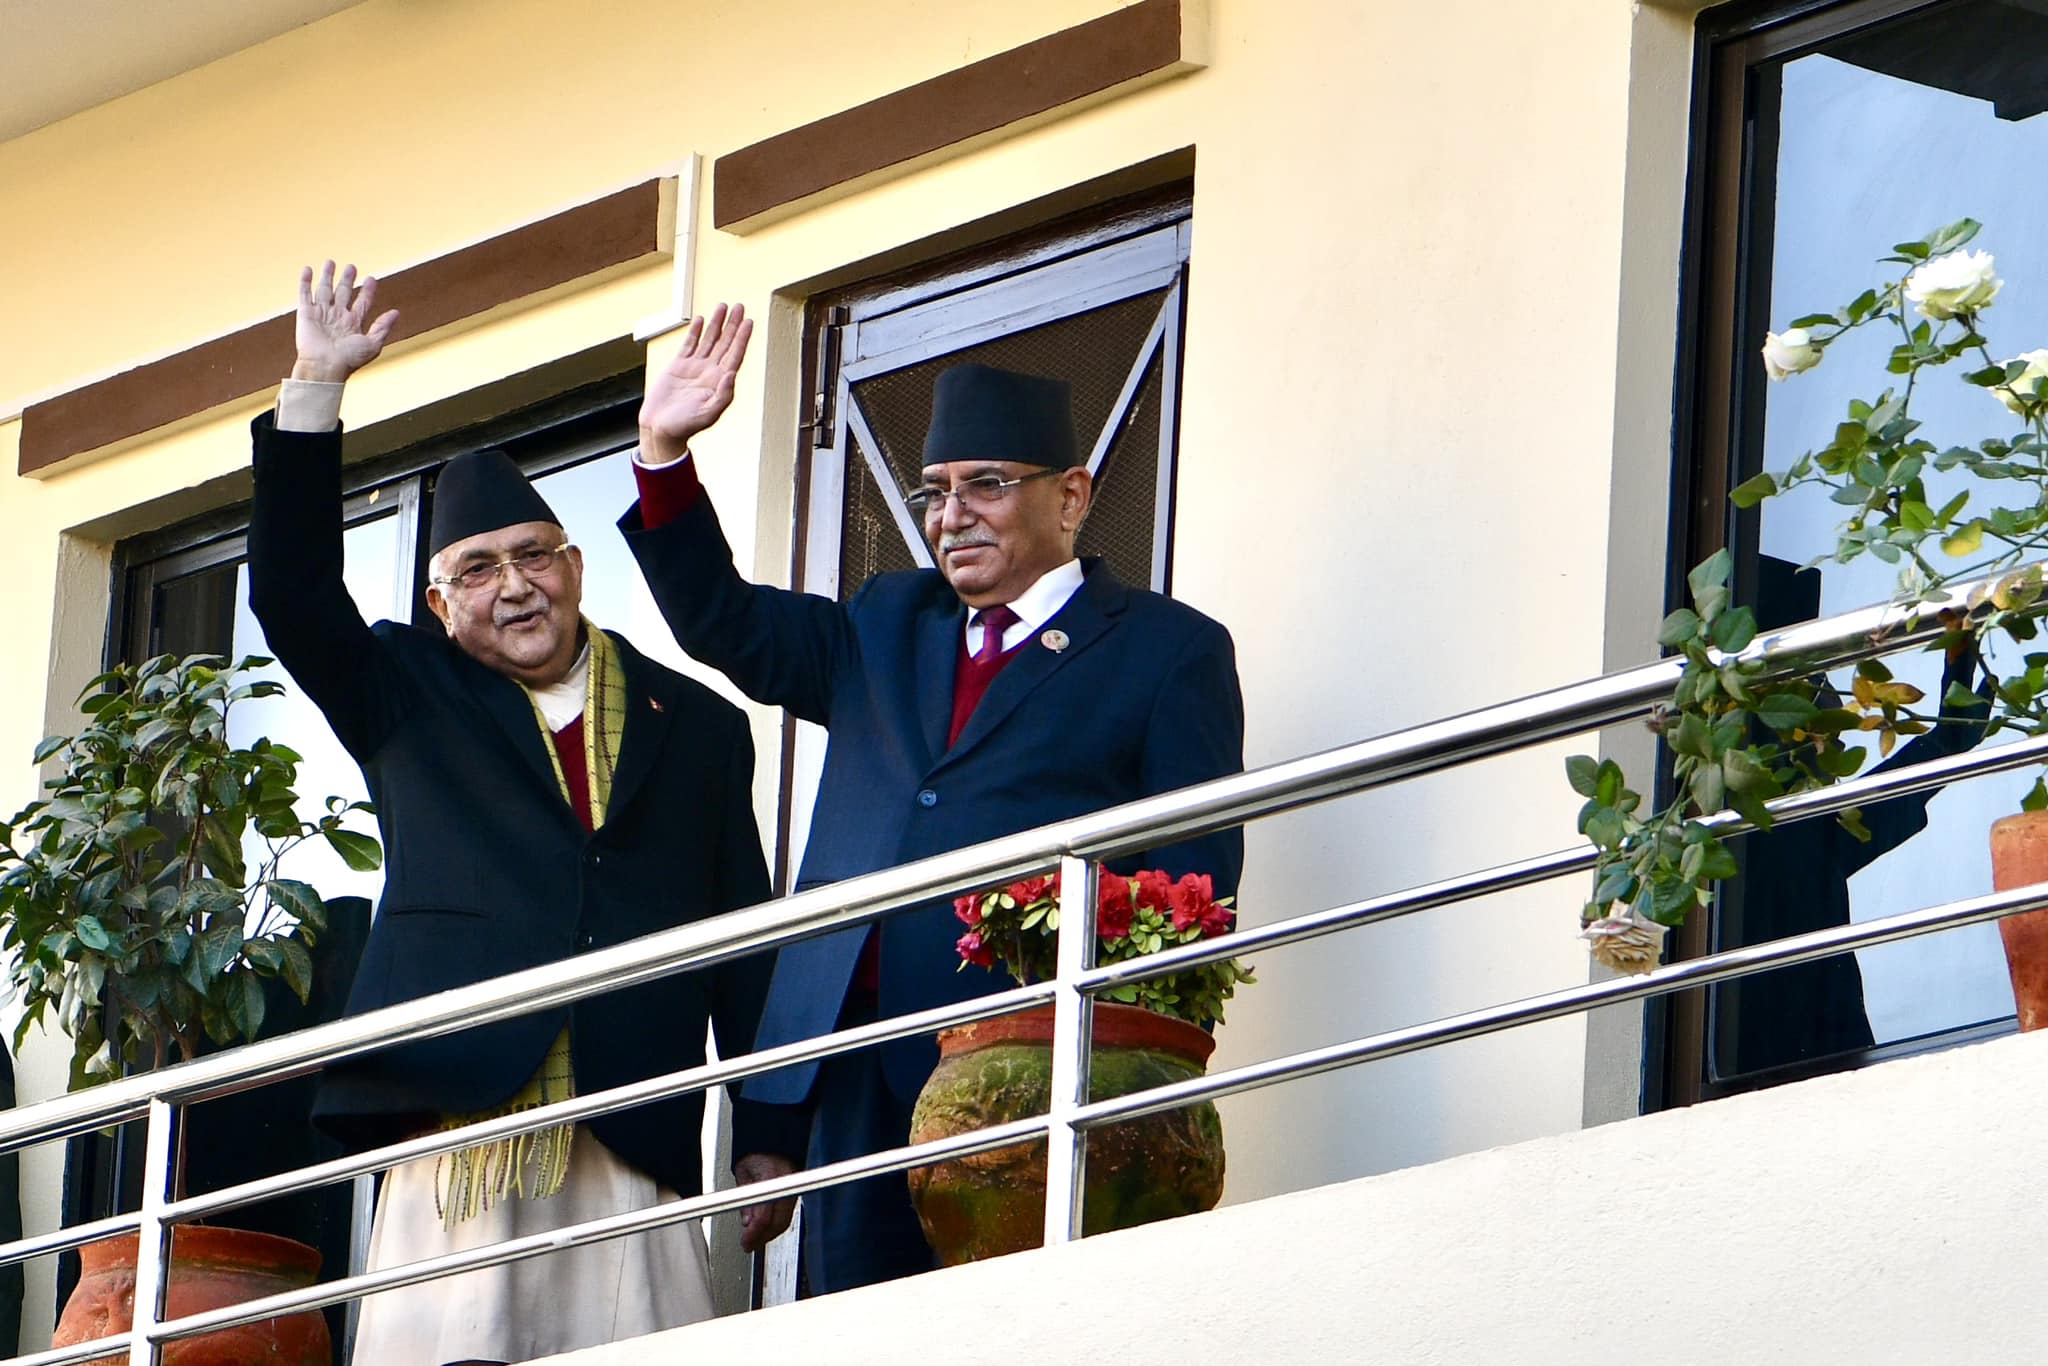 Prachanda becomes Nepal’s new Prime Minister with support from former Premier Oli